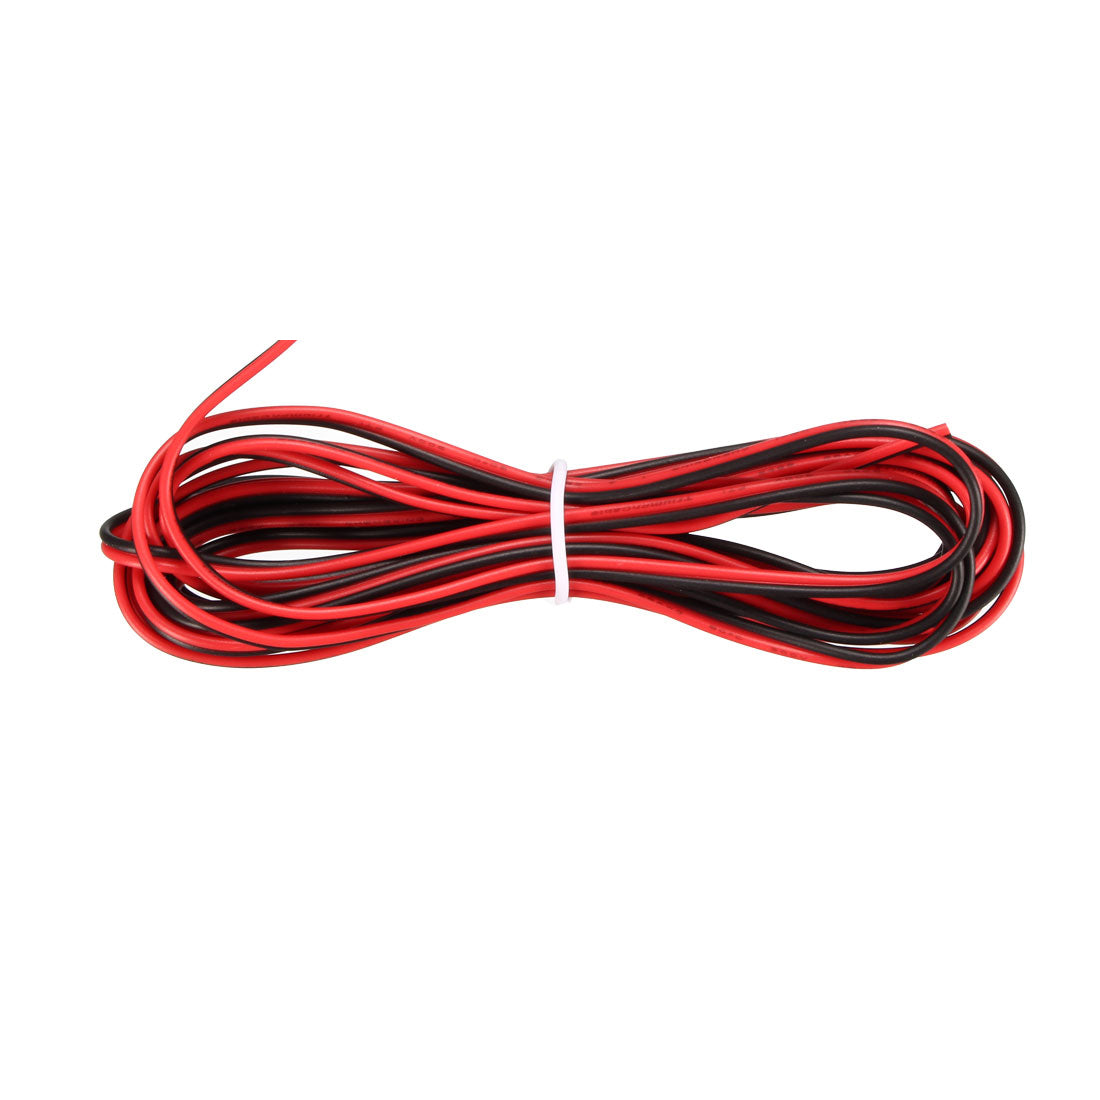 uxcell Uxcell Red Black Wire 2pin Extension Cable Cord 28 AWG Parallel Wire Tin Plated Copper 3 Meters Length Red Black for LED Strip Light